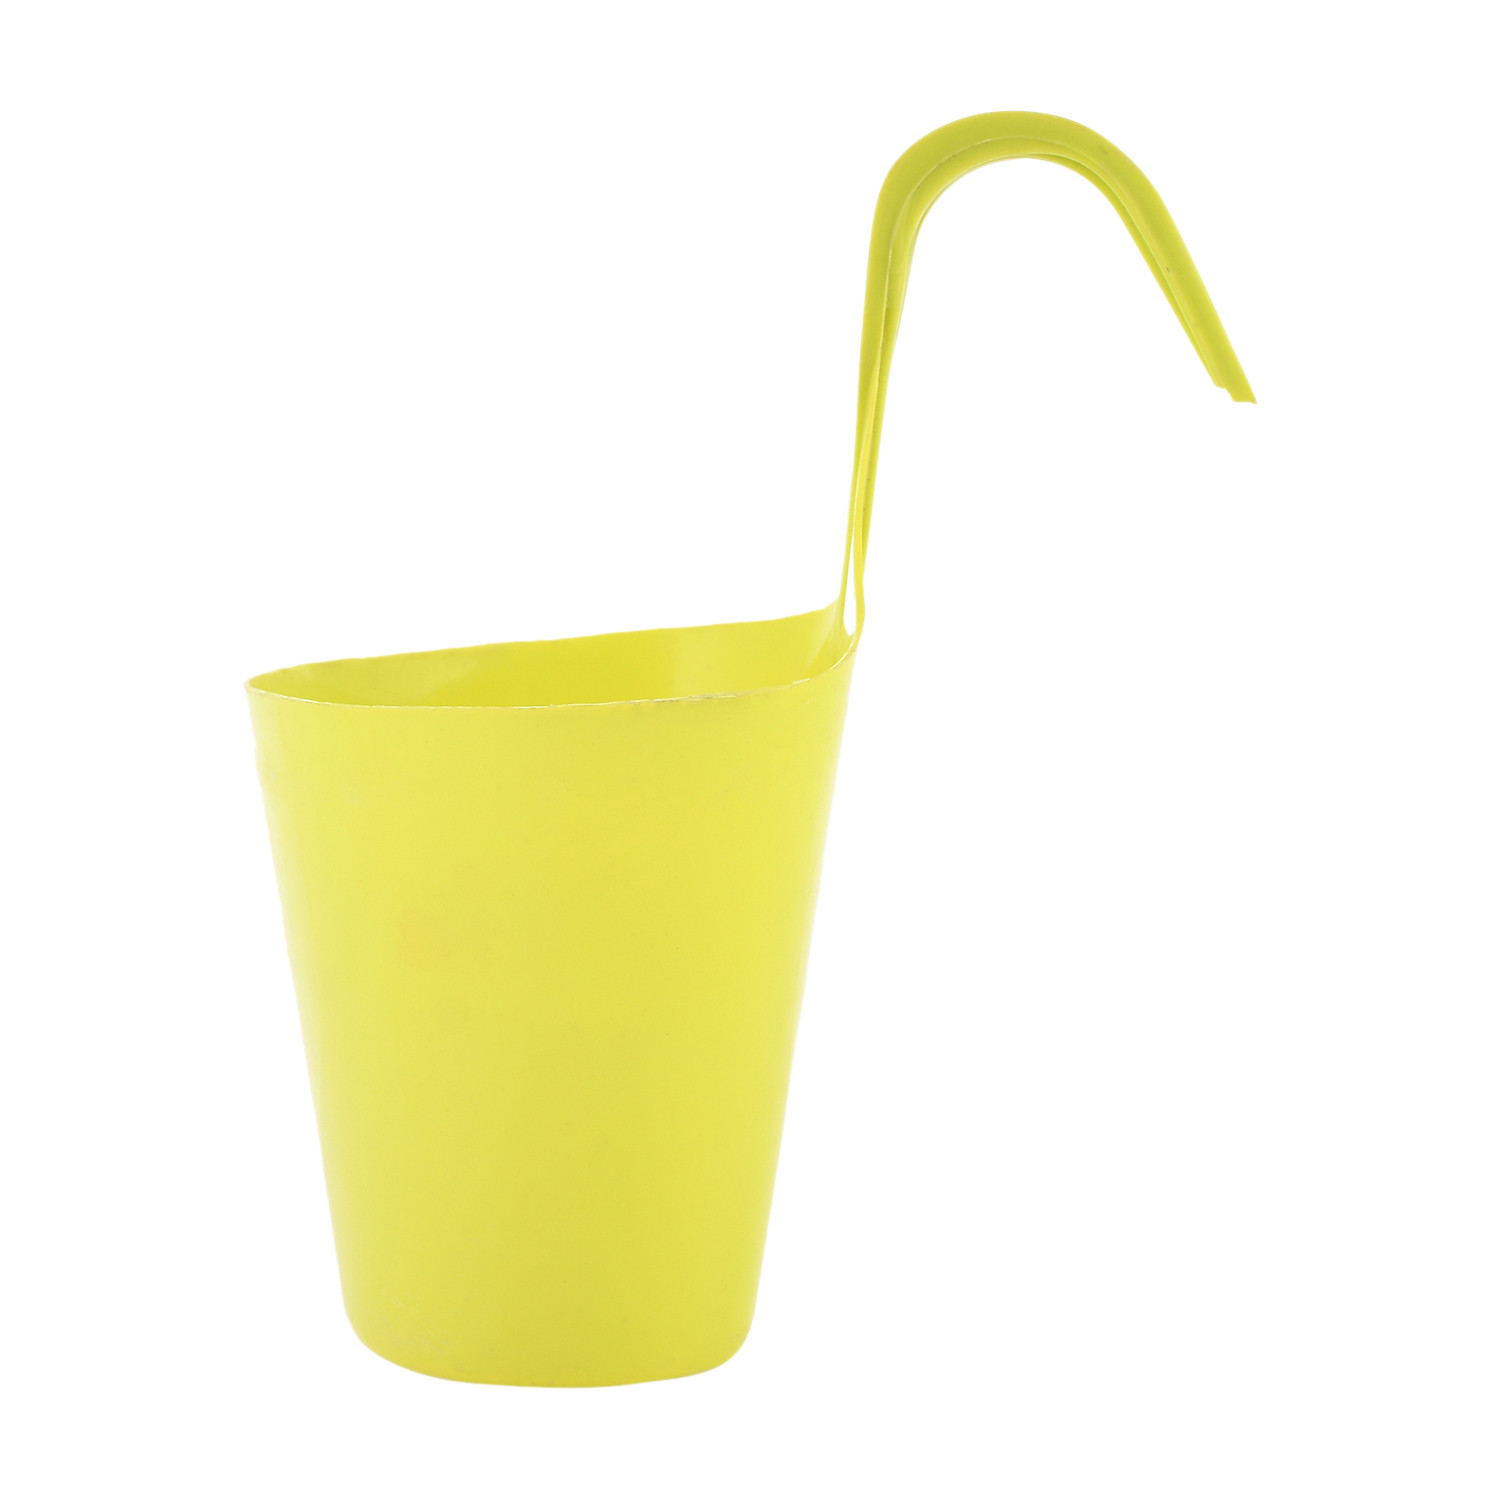 Kuber Industries Hanging Flower Pot|Single Hook Plant Container|Durable Plastic Glossy Finish Pots for Home|Balcony|Garden|9 Inch|(Green)